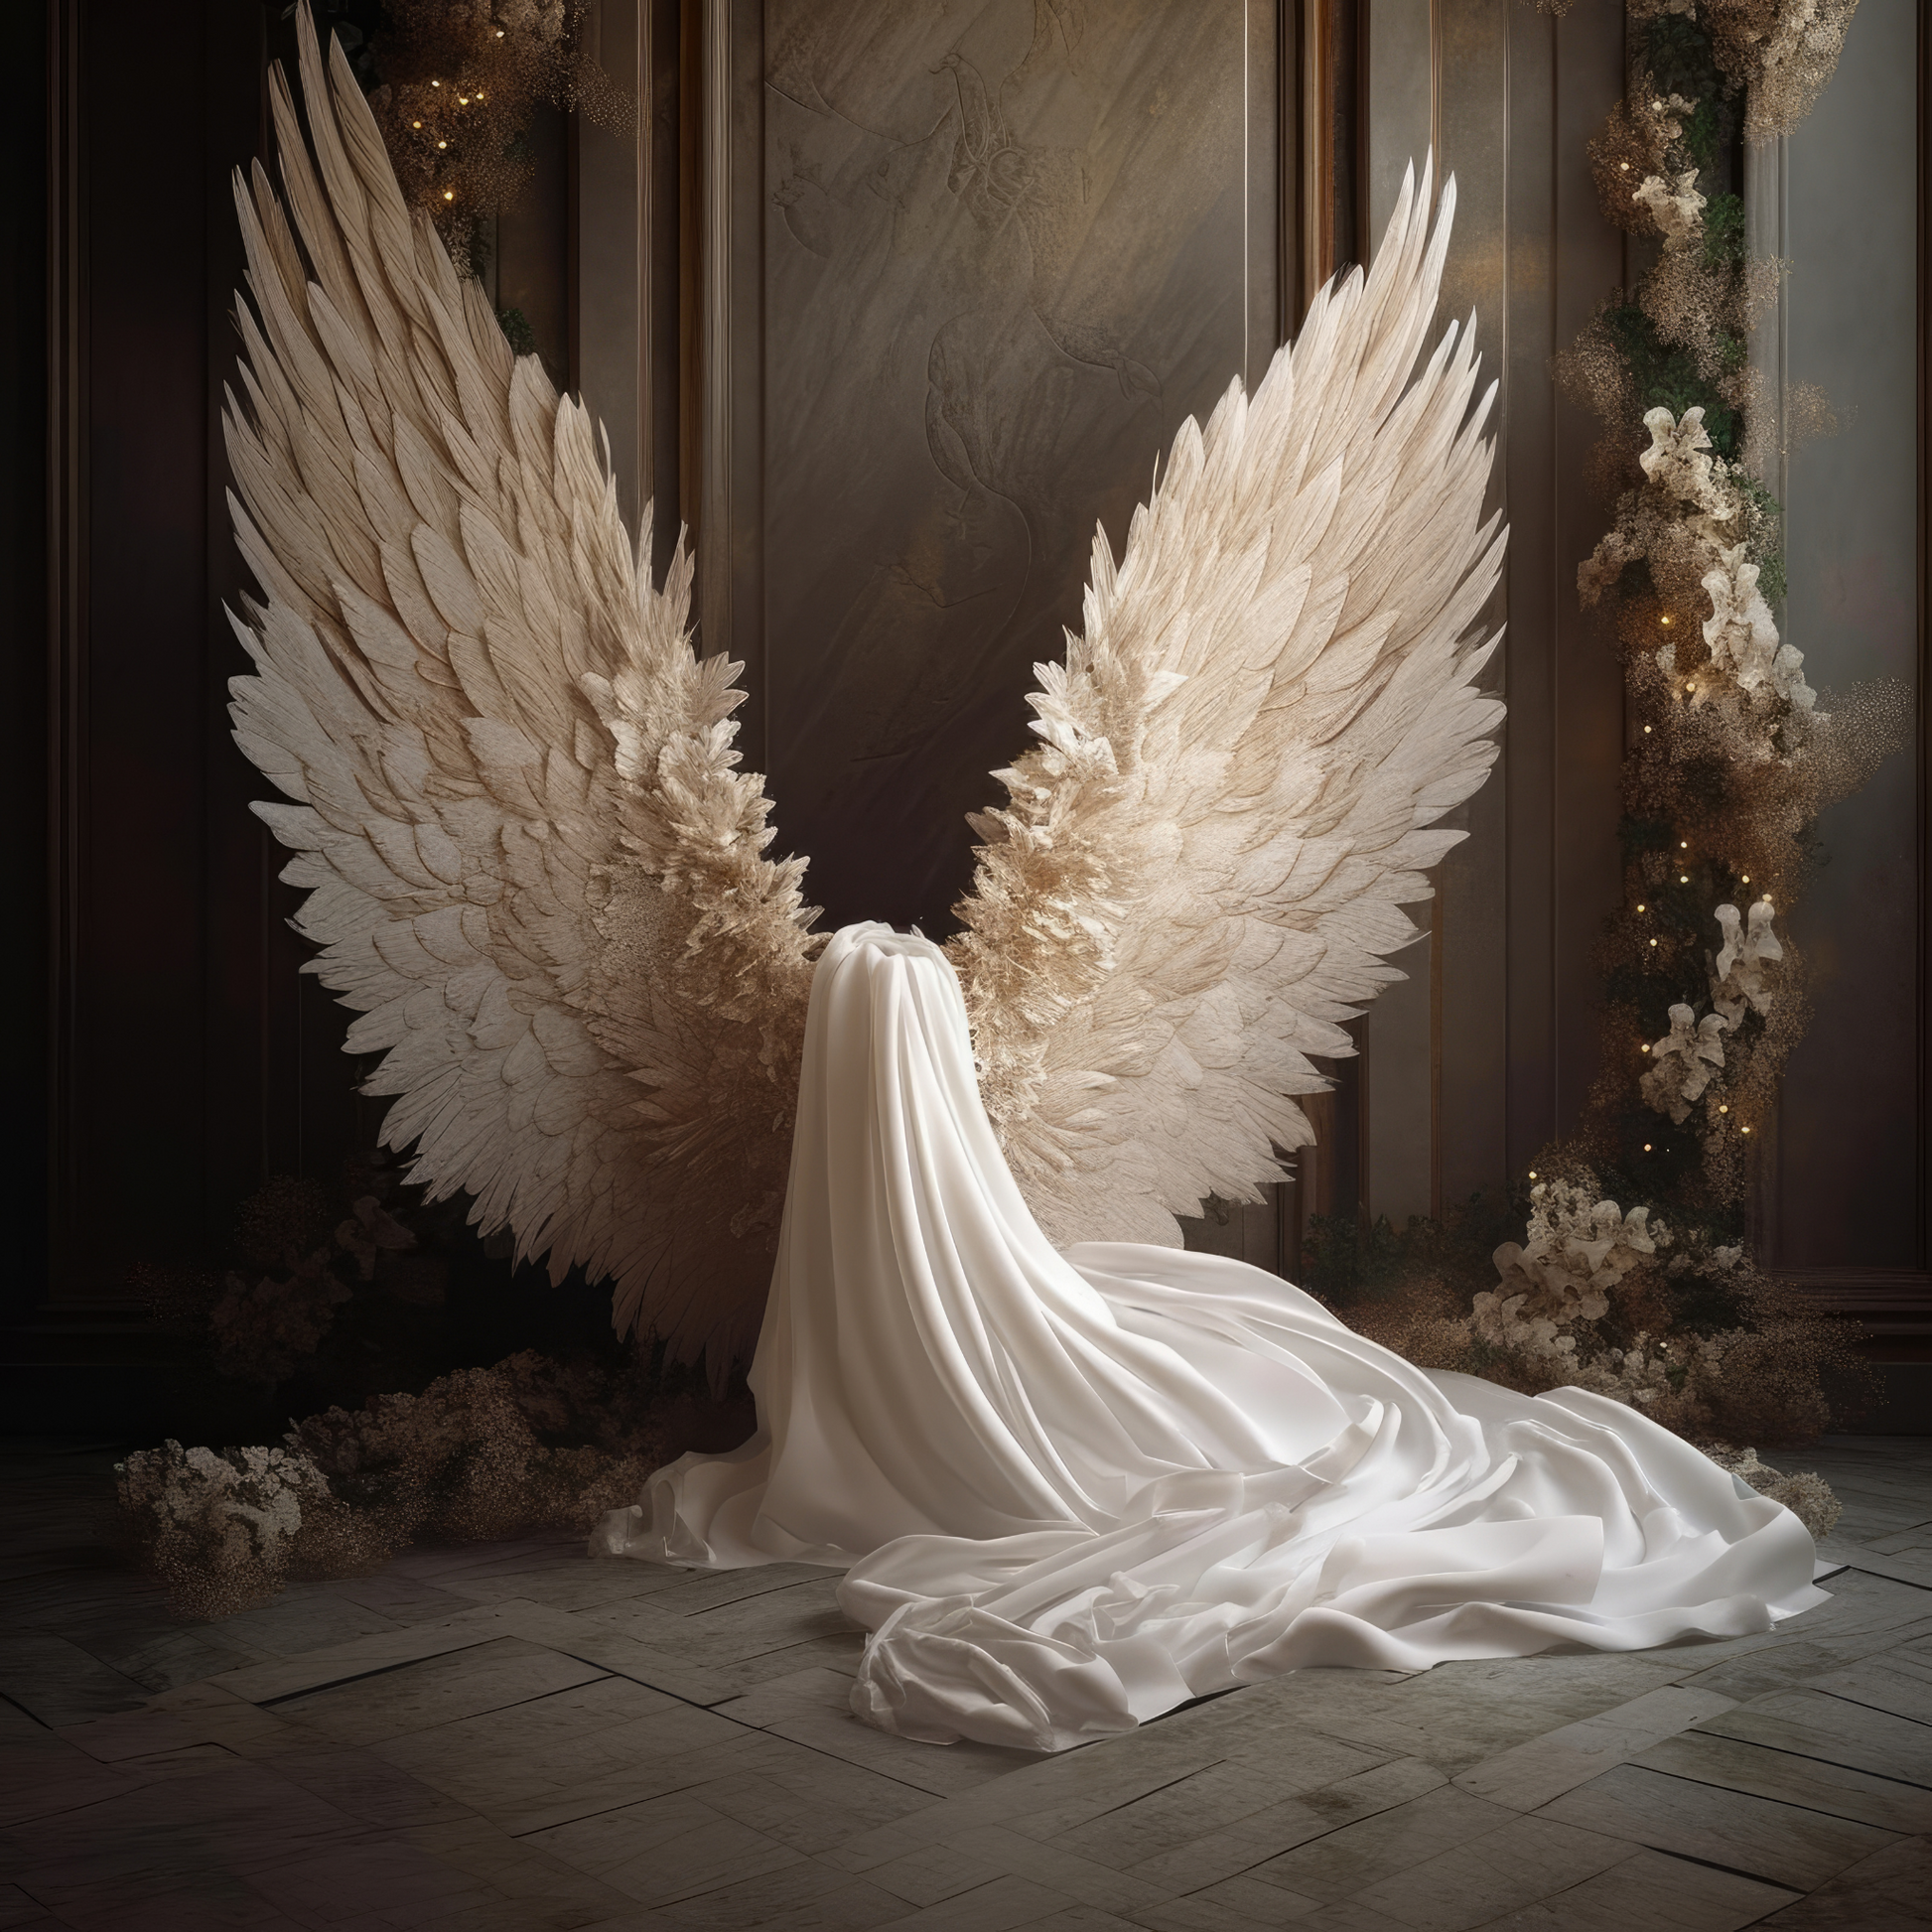 Gold angel Wings | Poster